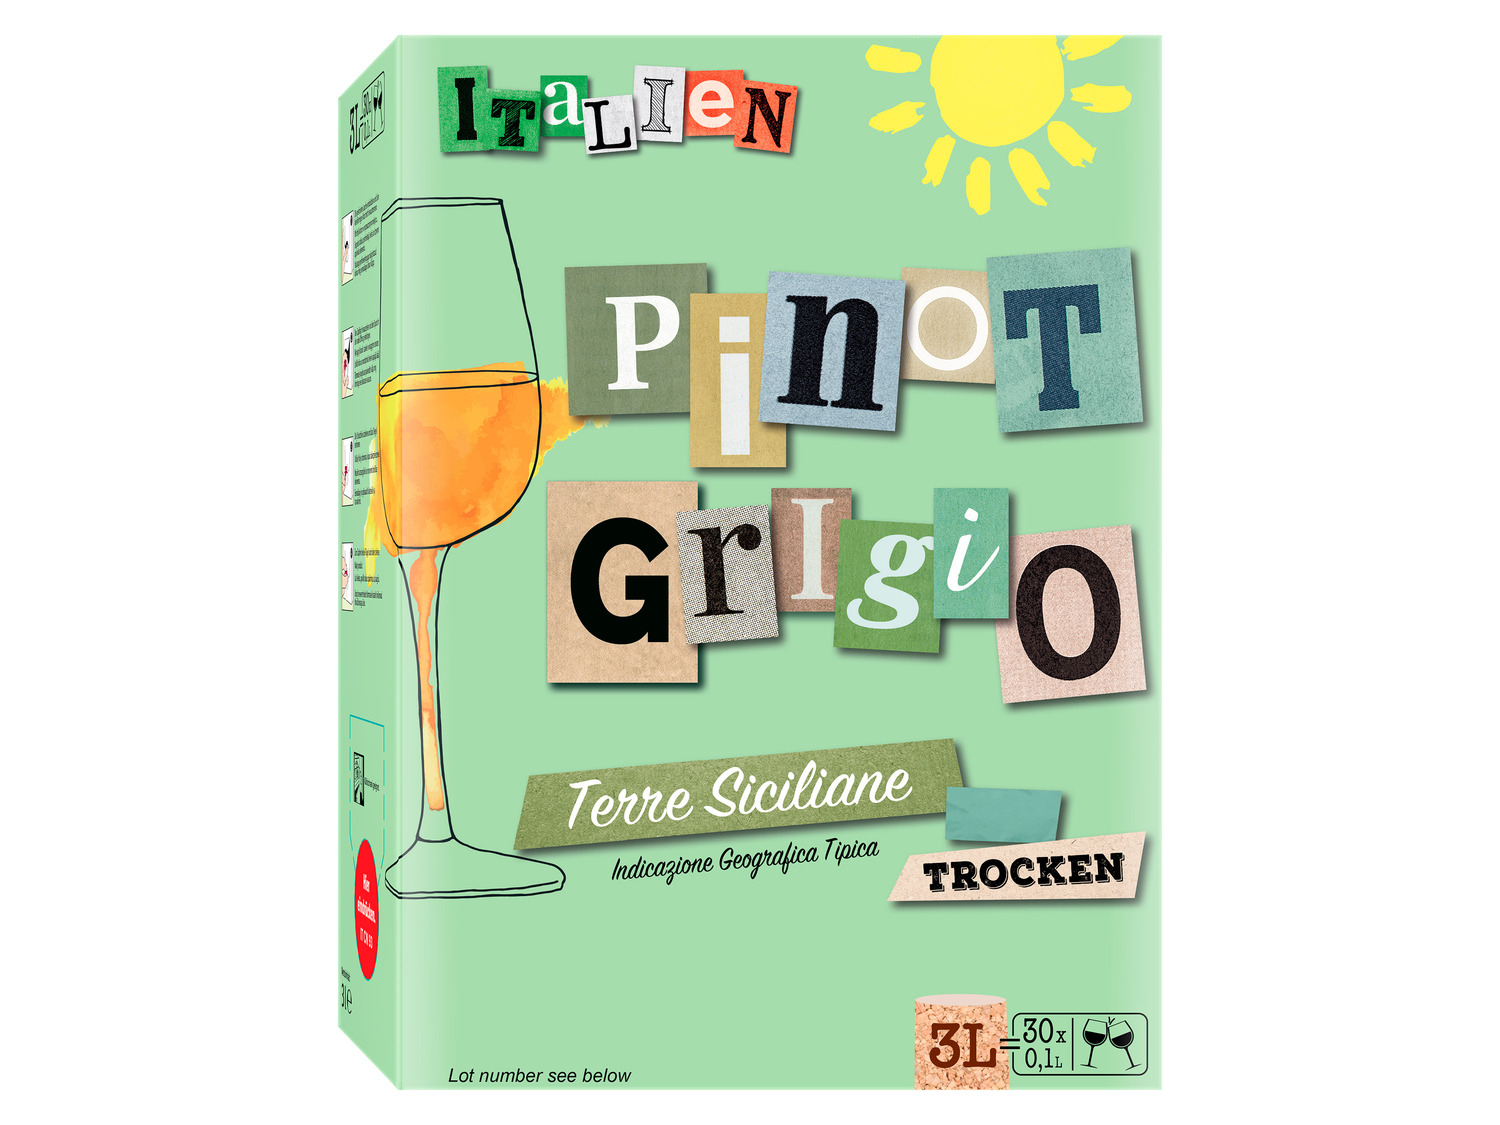 weißwein pinot 2023 terre Products siciliane like: / bag trocken grigio 3 Price in l ᐉ - box 0 Lidl igt Compare